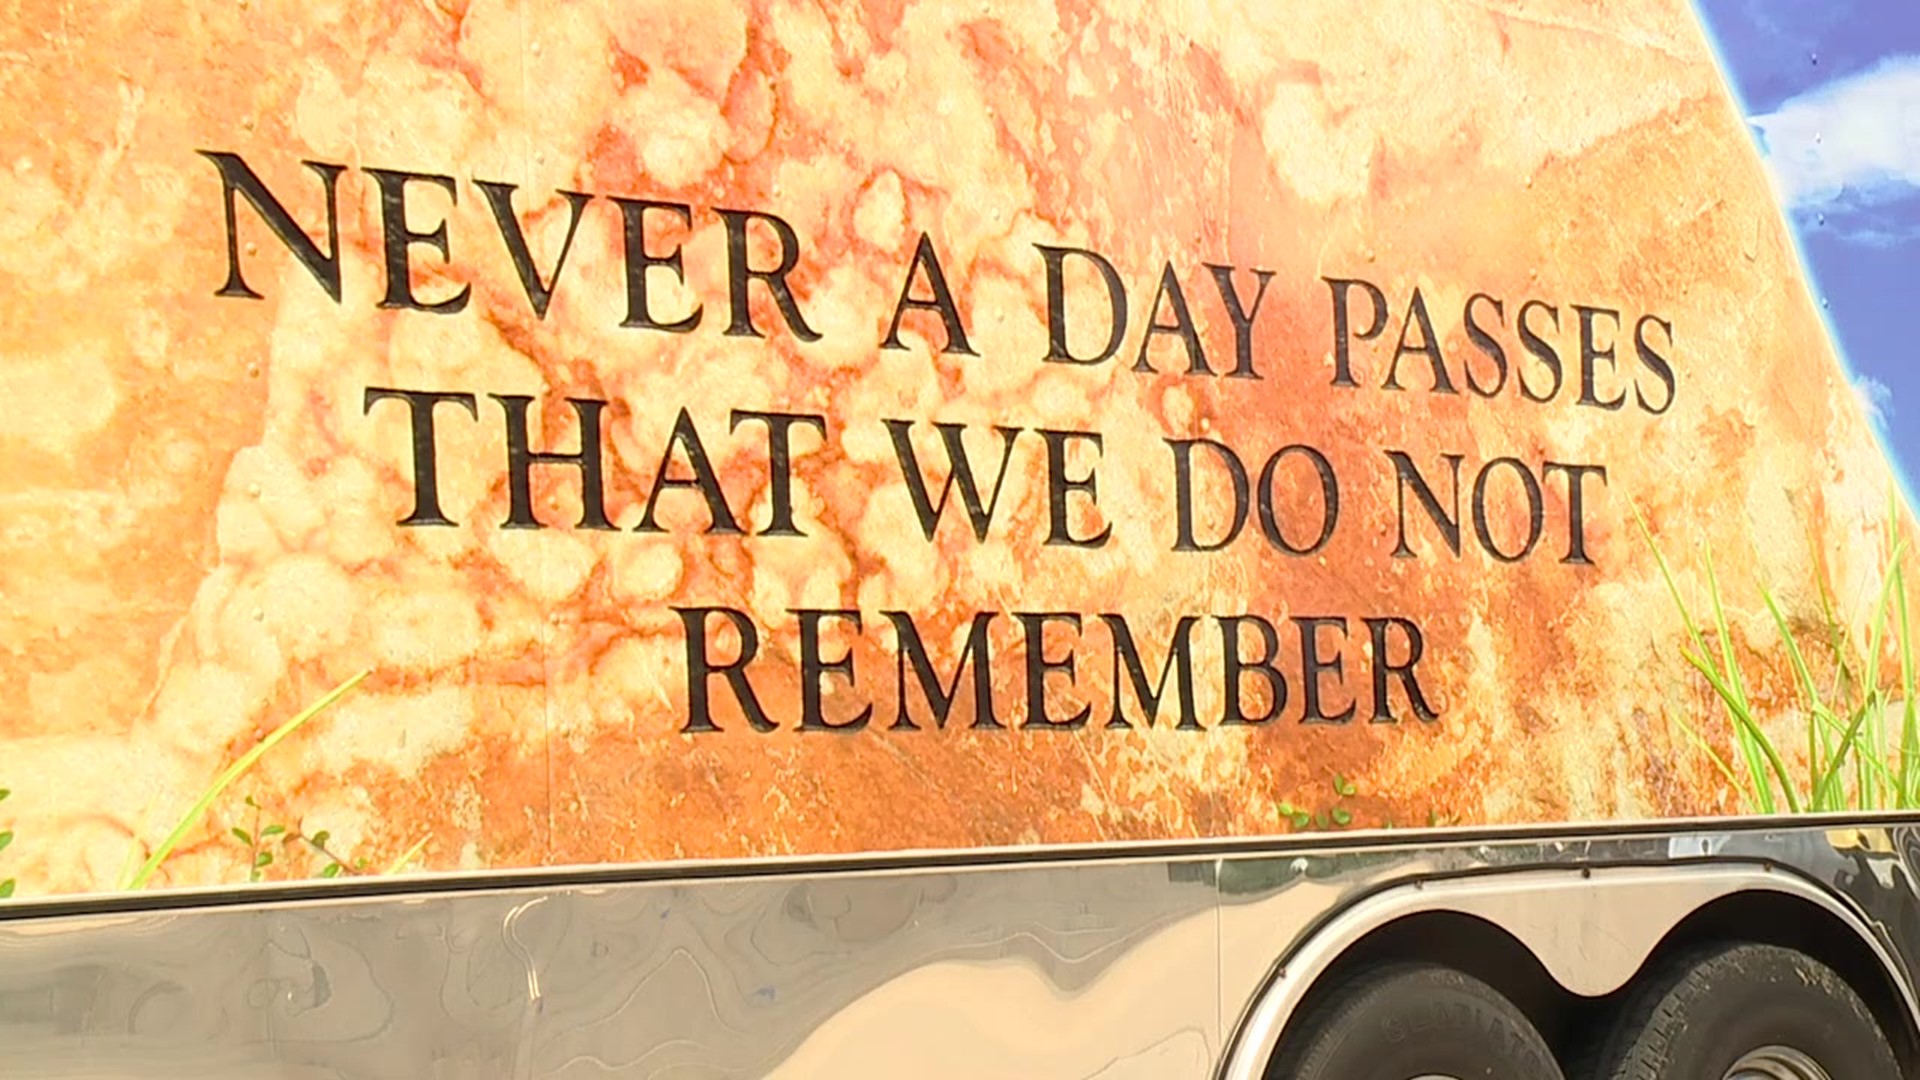 The state's mobile DUI memorial was in town Wednesday. With the Fourth of July holiday coming up, officials are warning against driving under the influence.